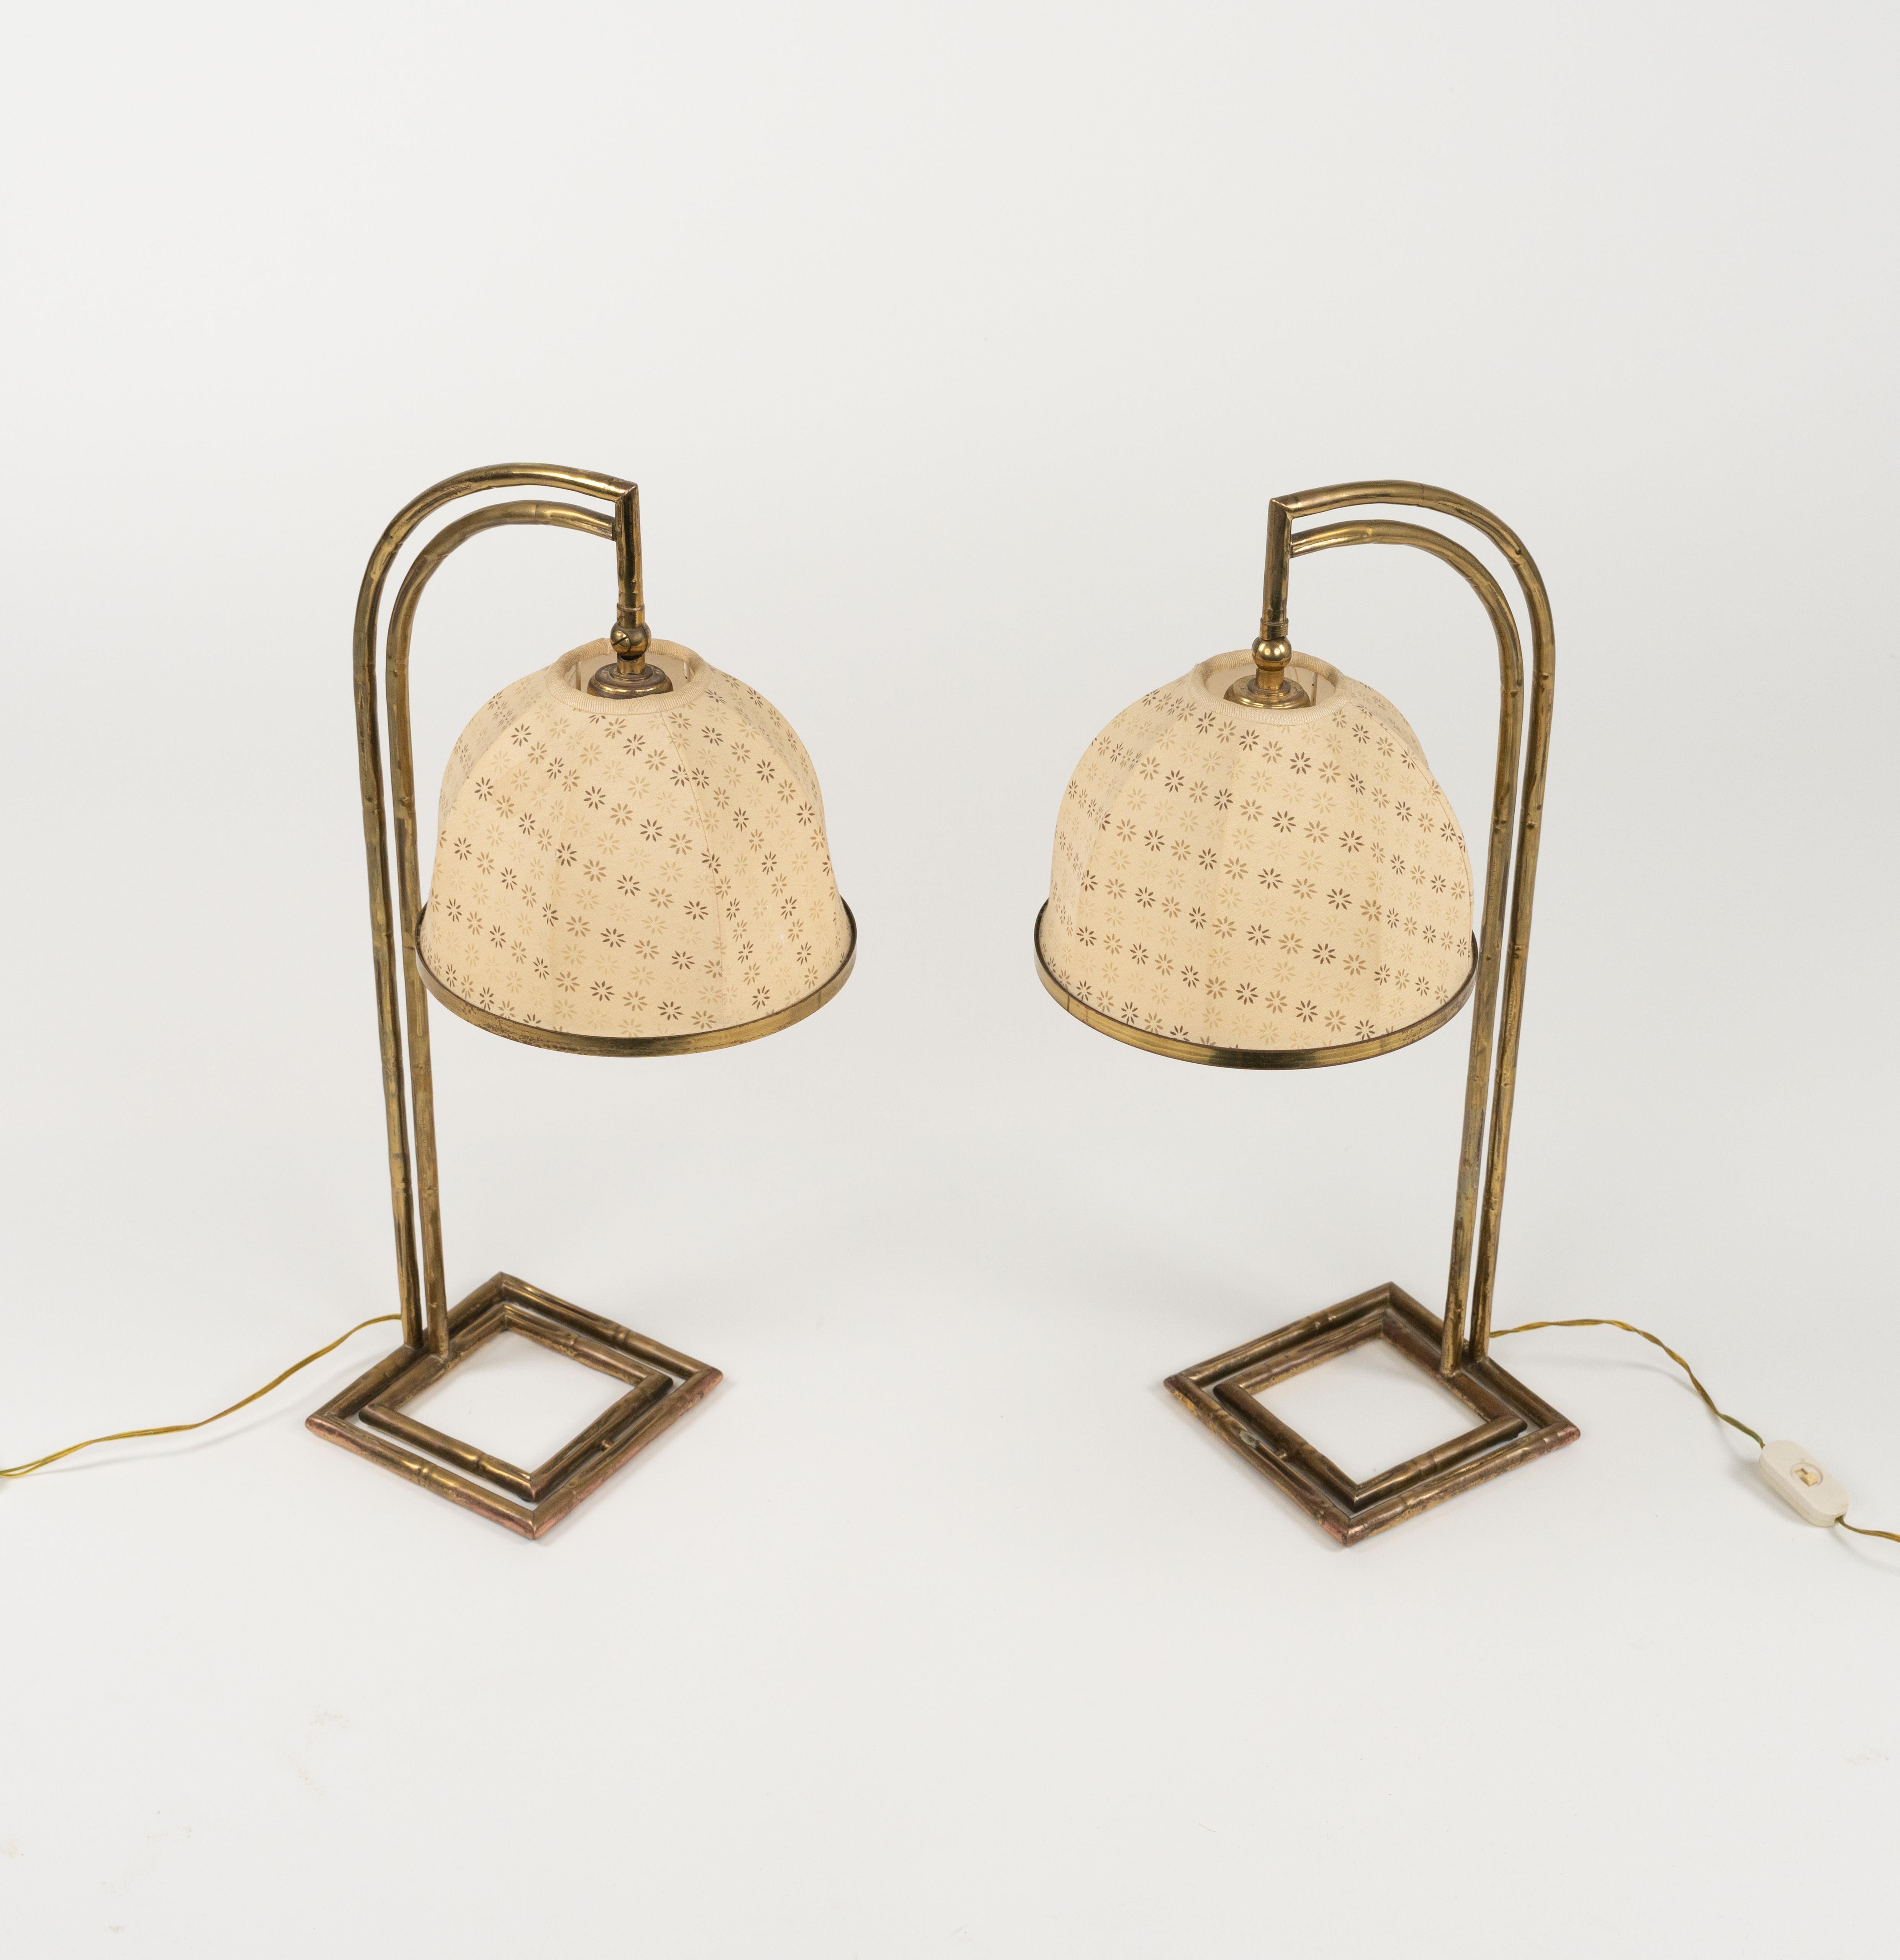 Midcentury amazing pair of adjustable table lamp in brass faux bamboo and fabric lampshade in the style of Maison Baguès.

Made in Italy in the 1960s.

A beautiful pair of lamps that is perfectly working. European plug (works outside EU with a